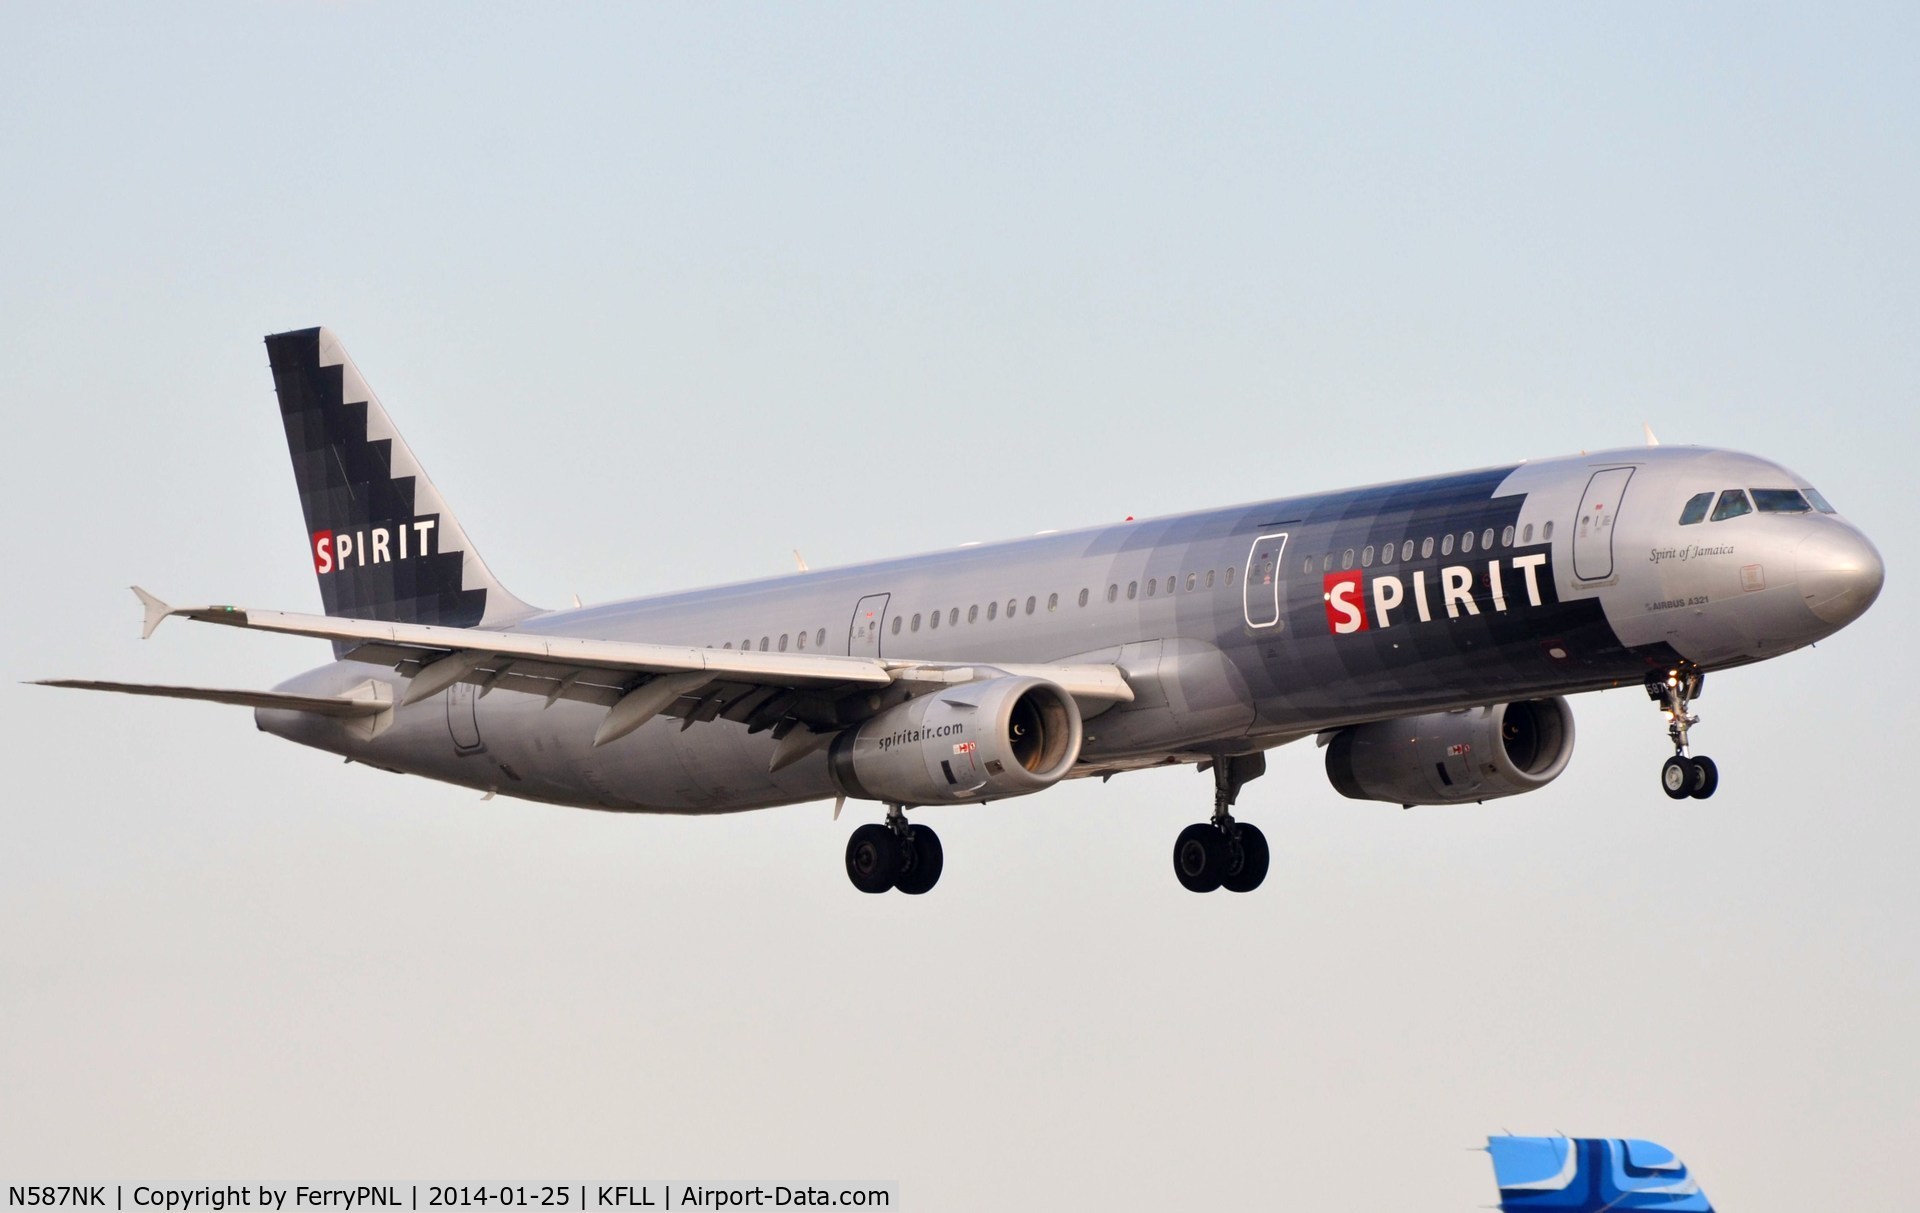 N587NK, 2005 Airbus A321-231 C/N 2476, One of two A321's still operating for Spirit